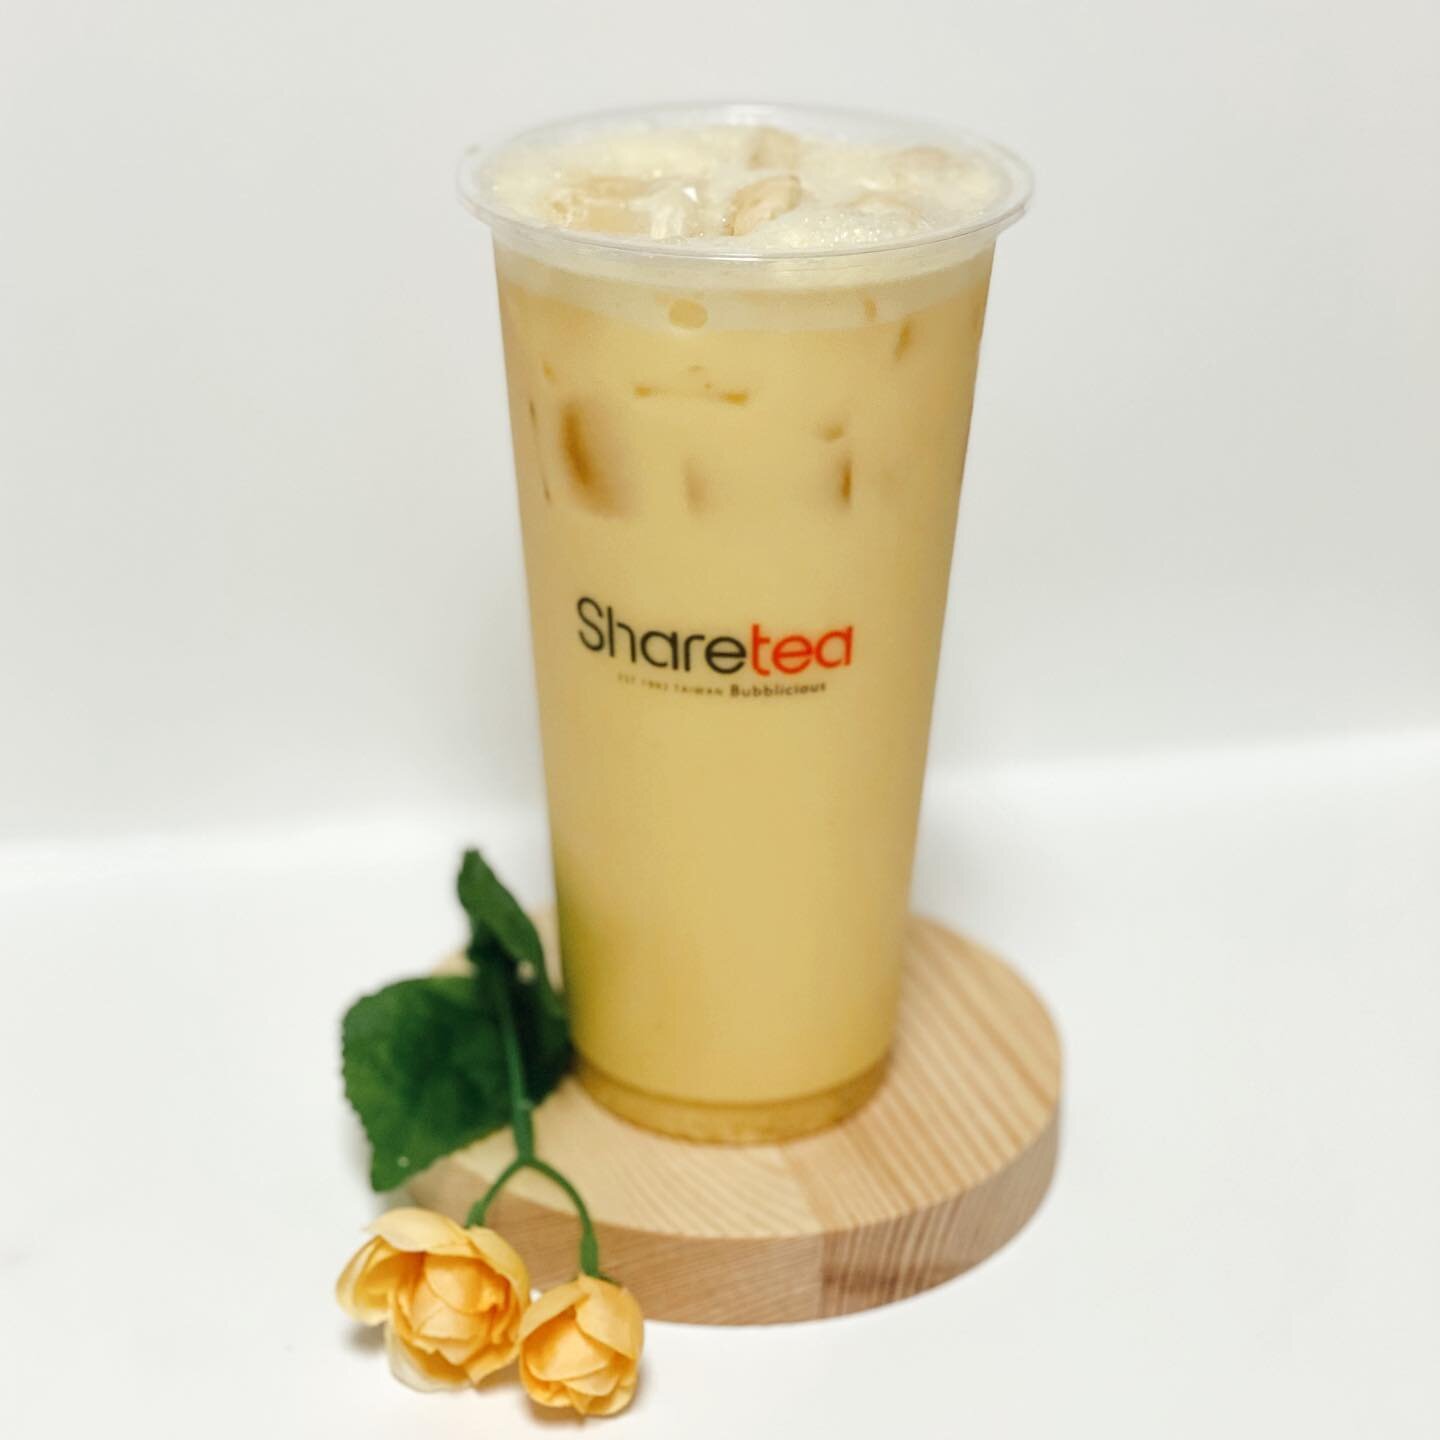 Our mango green milk tea is a crowd favorite! 🥭 💛 

Come give it a try today! We&rsquo;re open till 9PM today 🕘